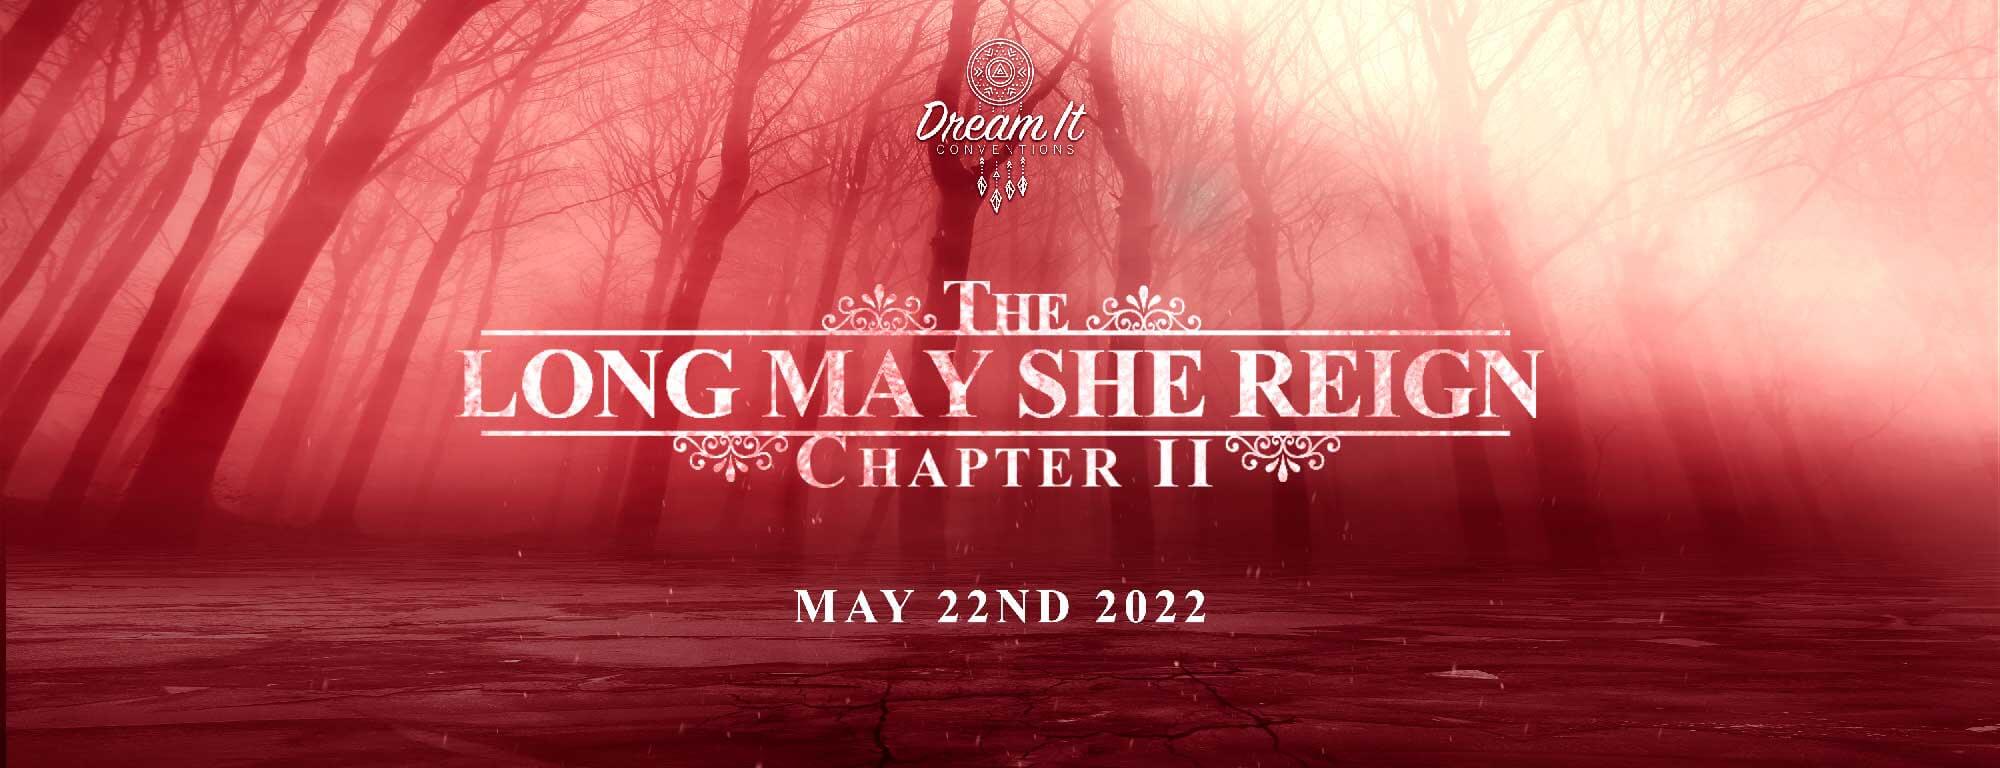 Long May She Reign 2